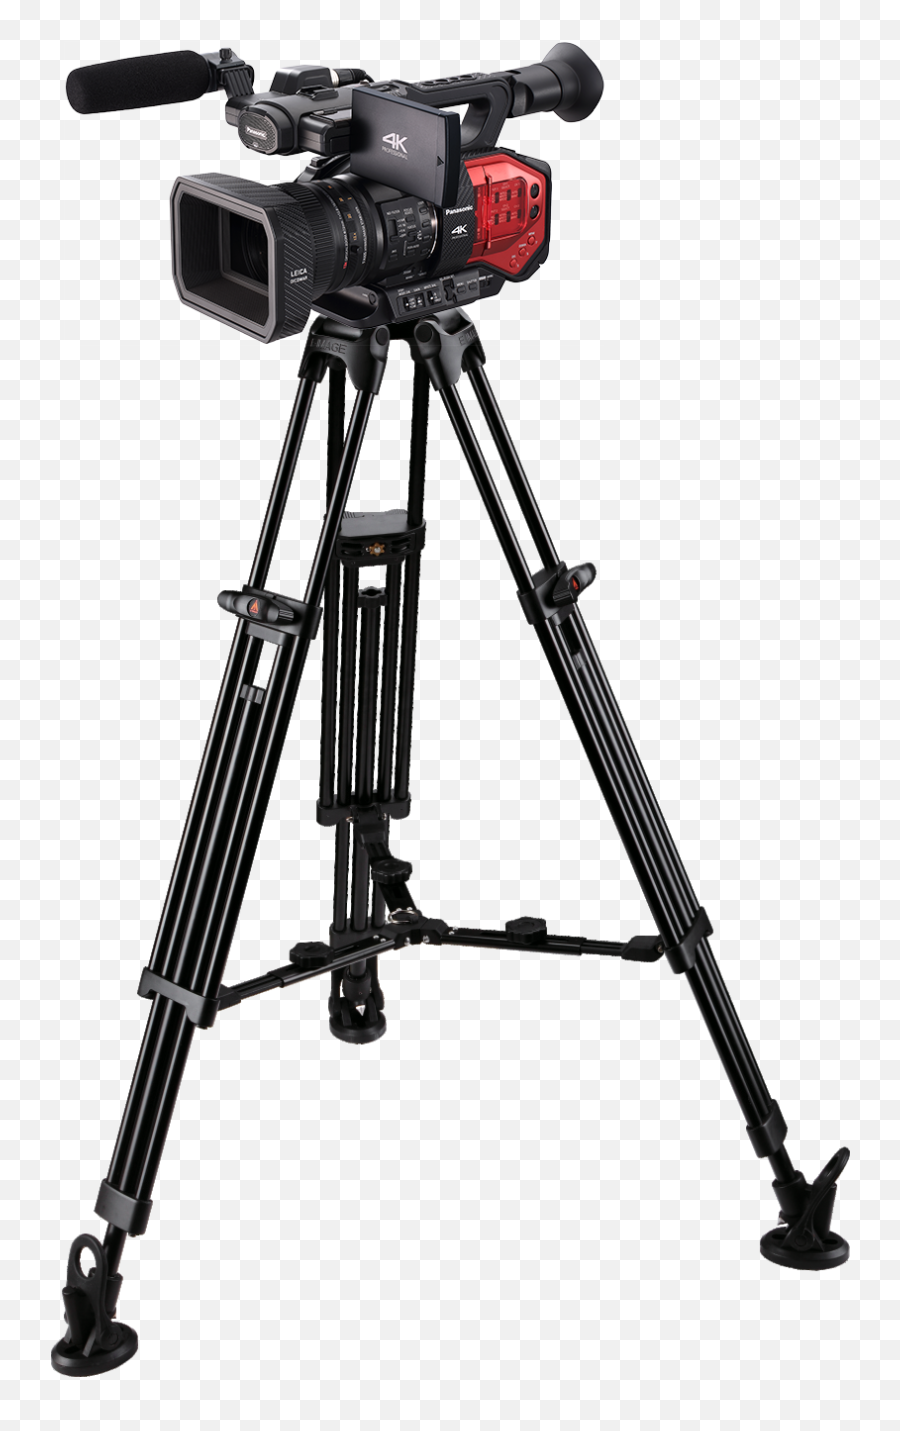 Tripod Png Images Free Download - E Image Video Tripod,Stand Png